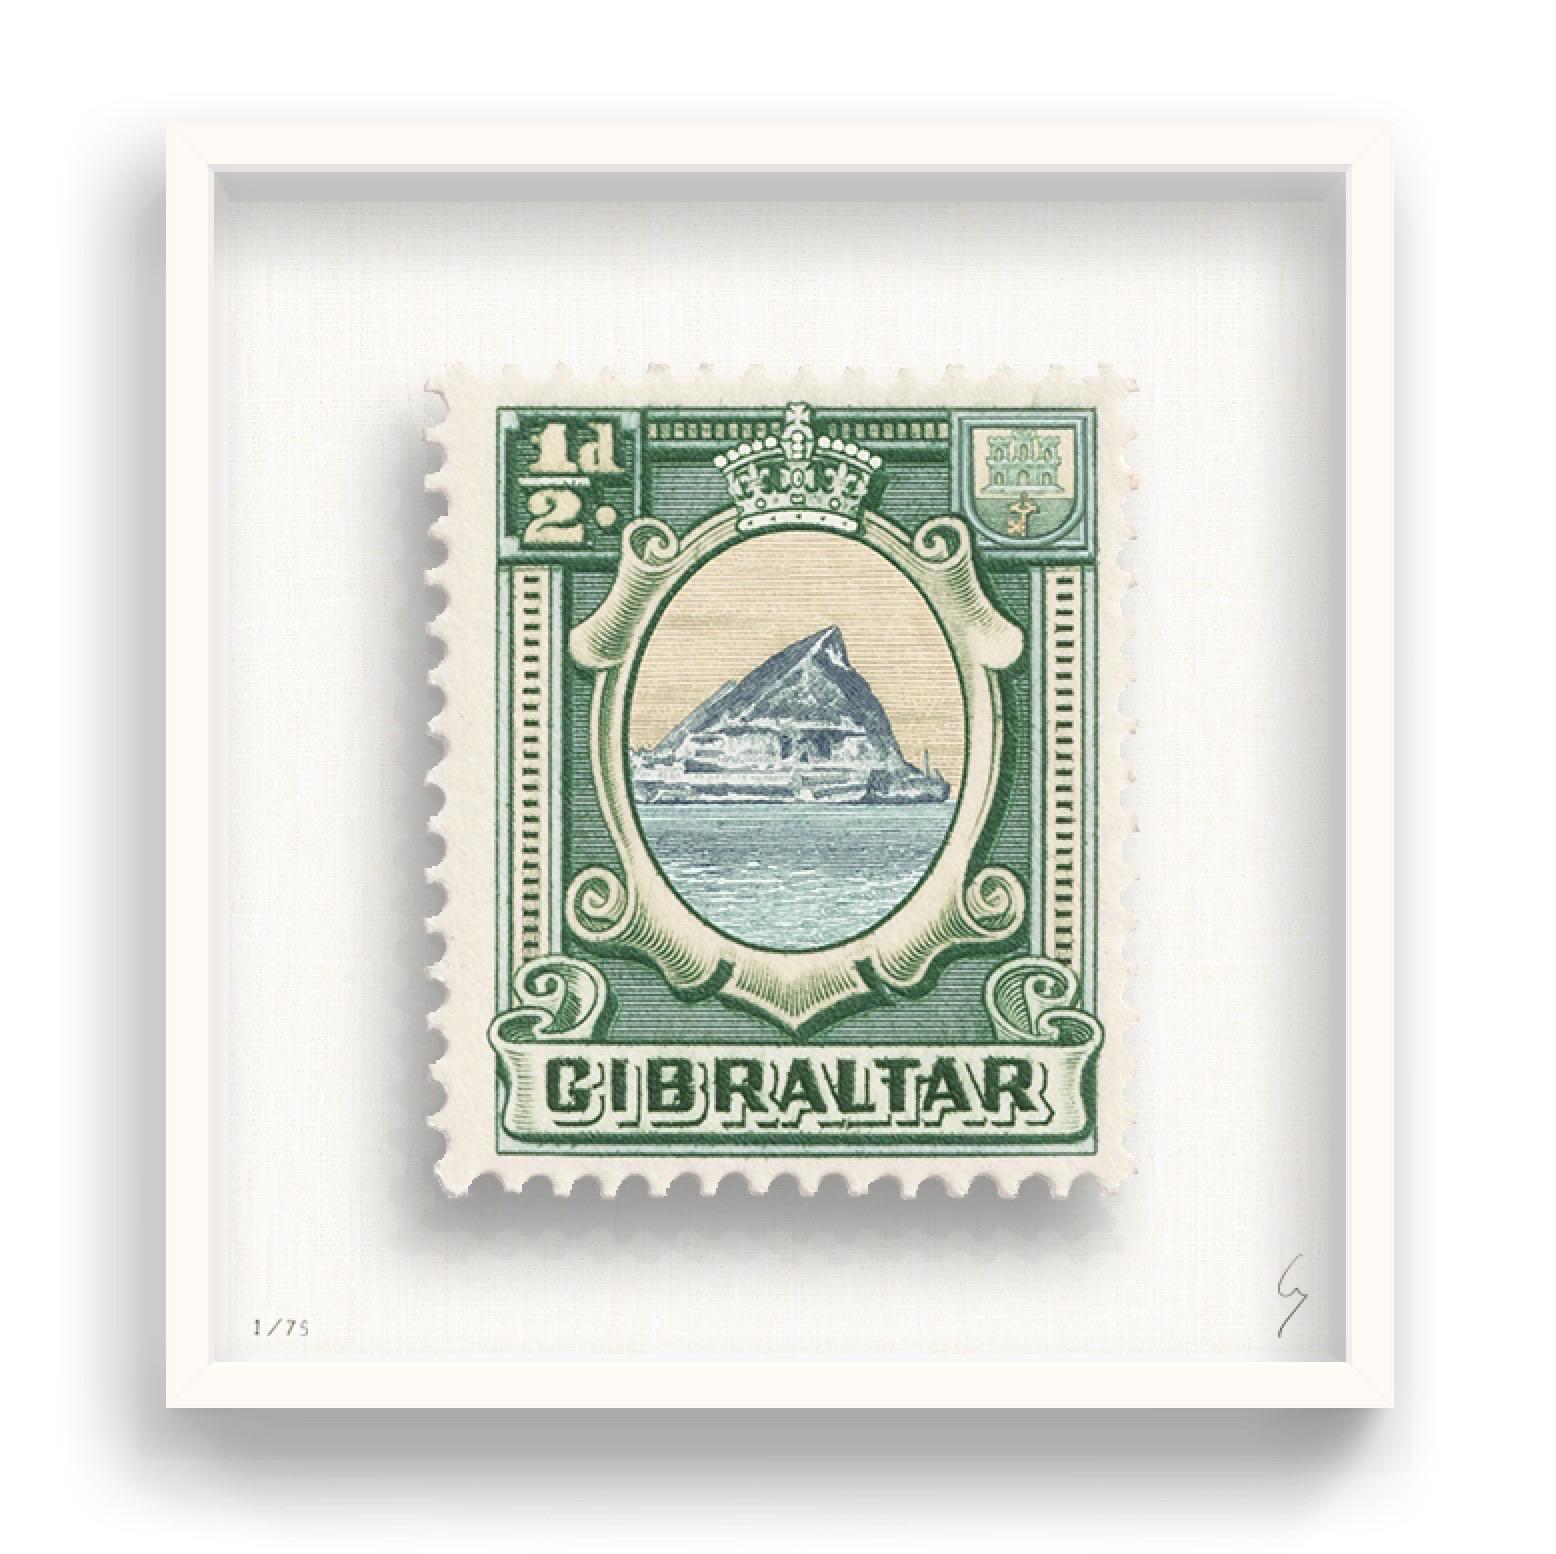 Guy Gee, Gibraltar (medium)

Hand-engraved print on 350gsm on G.F Smith card
53 x 56cm (20 4/5 x 22 2/5 in)
Frame included 
Edition of 75 

Each artwork by Guy had been digitally reimagined from an original postage stamp. Cut out and finished by